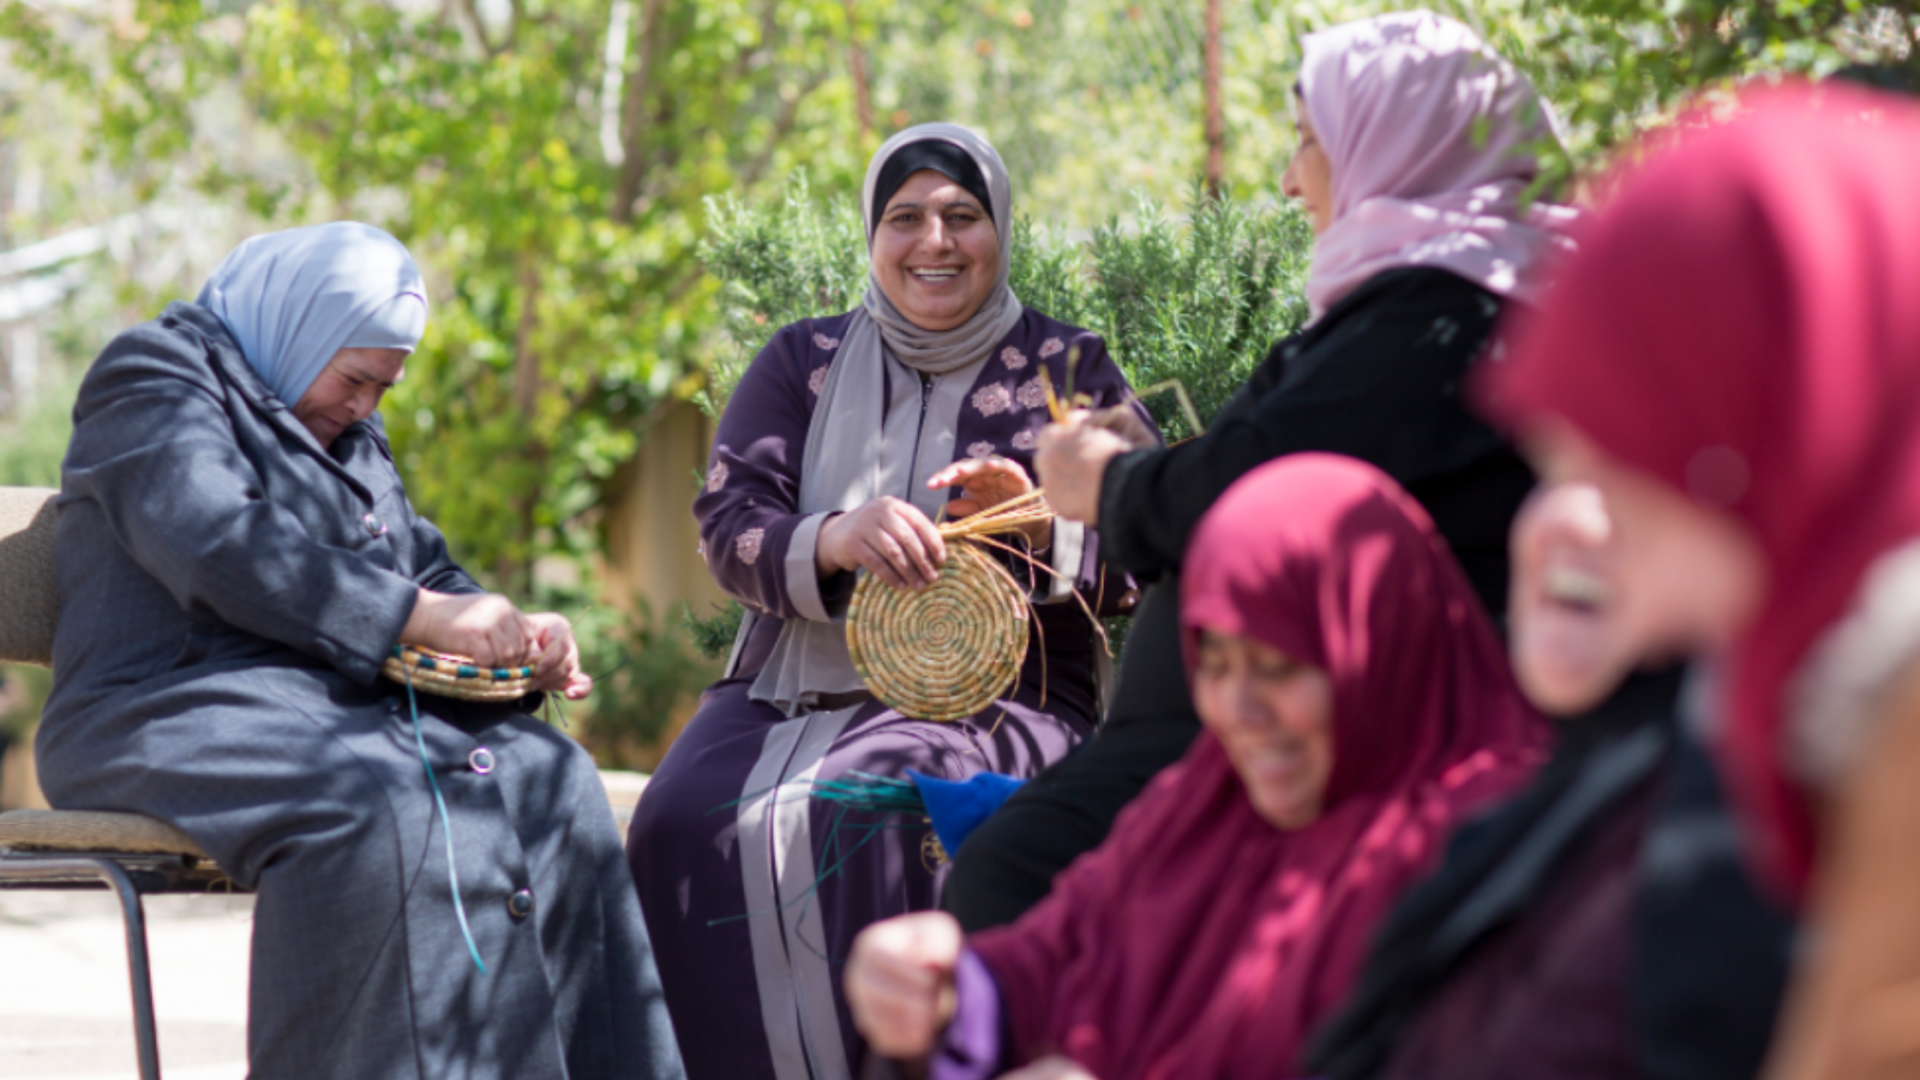 Sunbula’s Covid-19 relief campaign helped 8 partner producer groups in Palestine – here’s the story